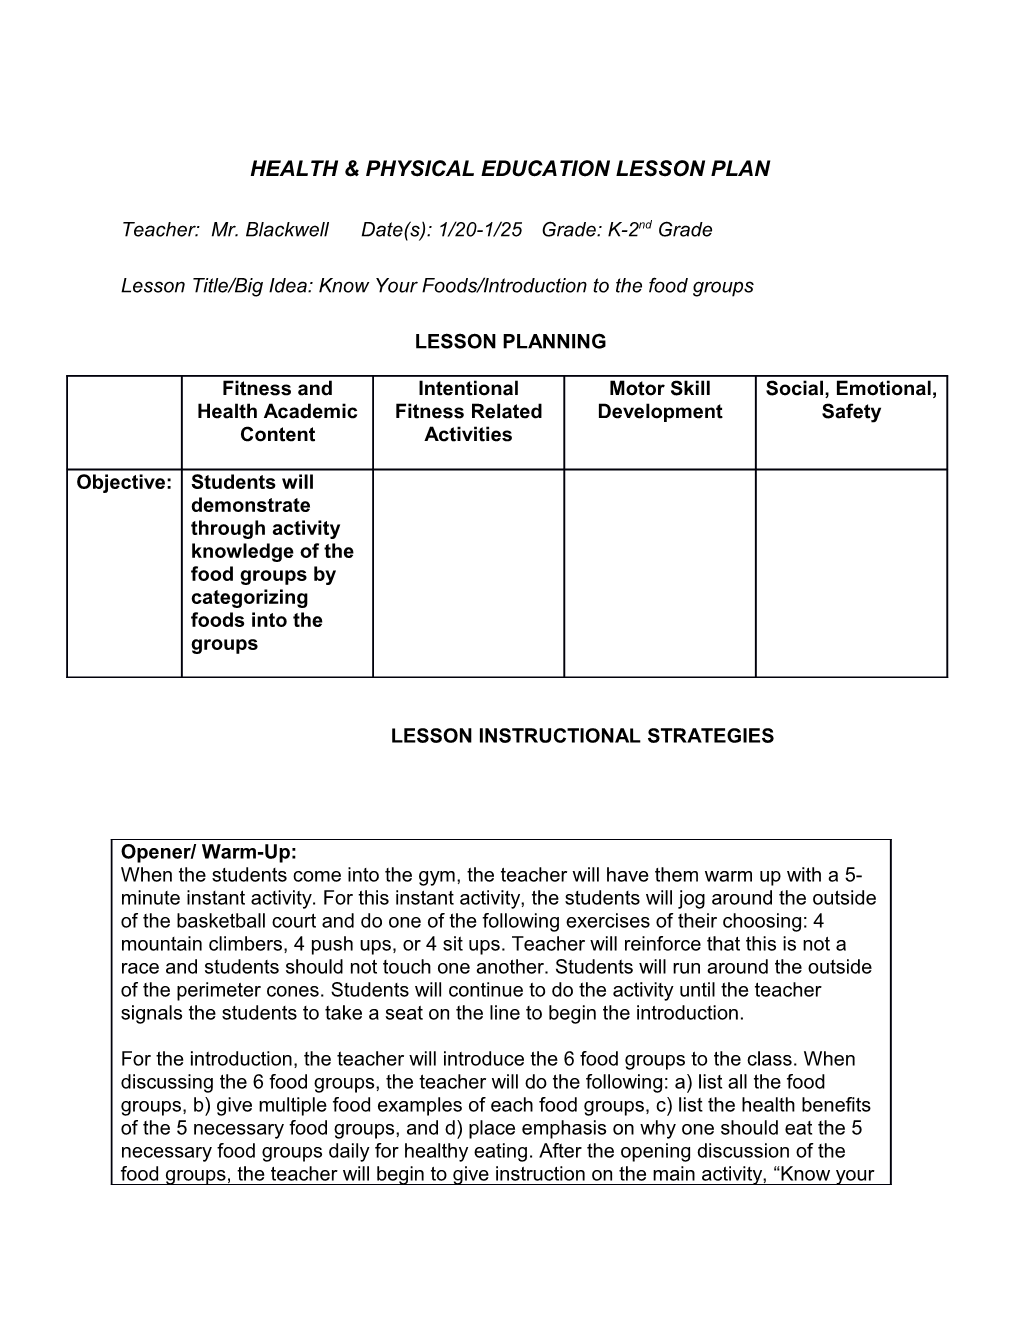 Health & Physical Education Lesson Plan